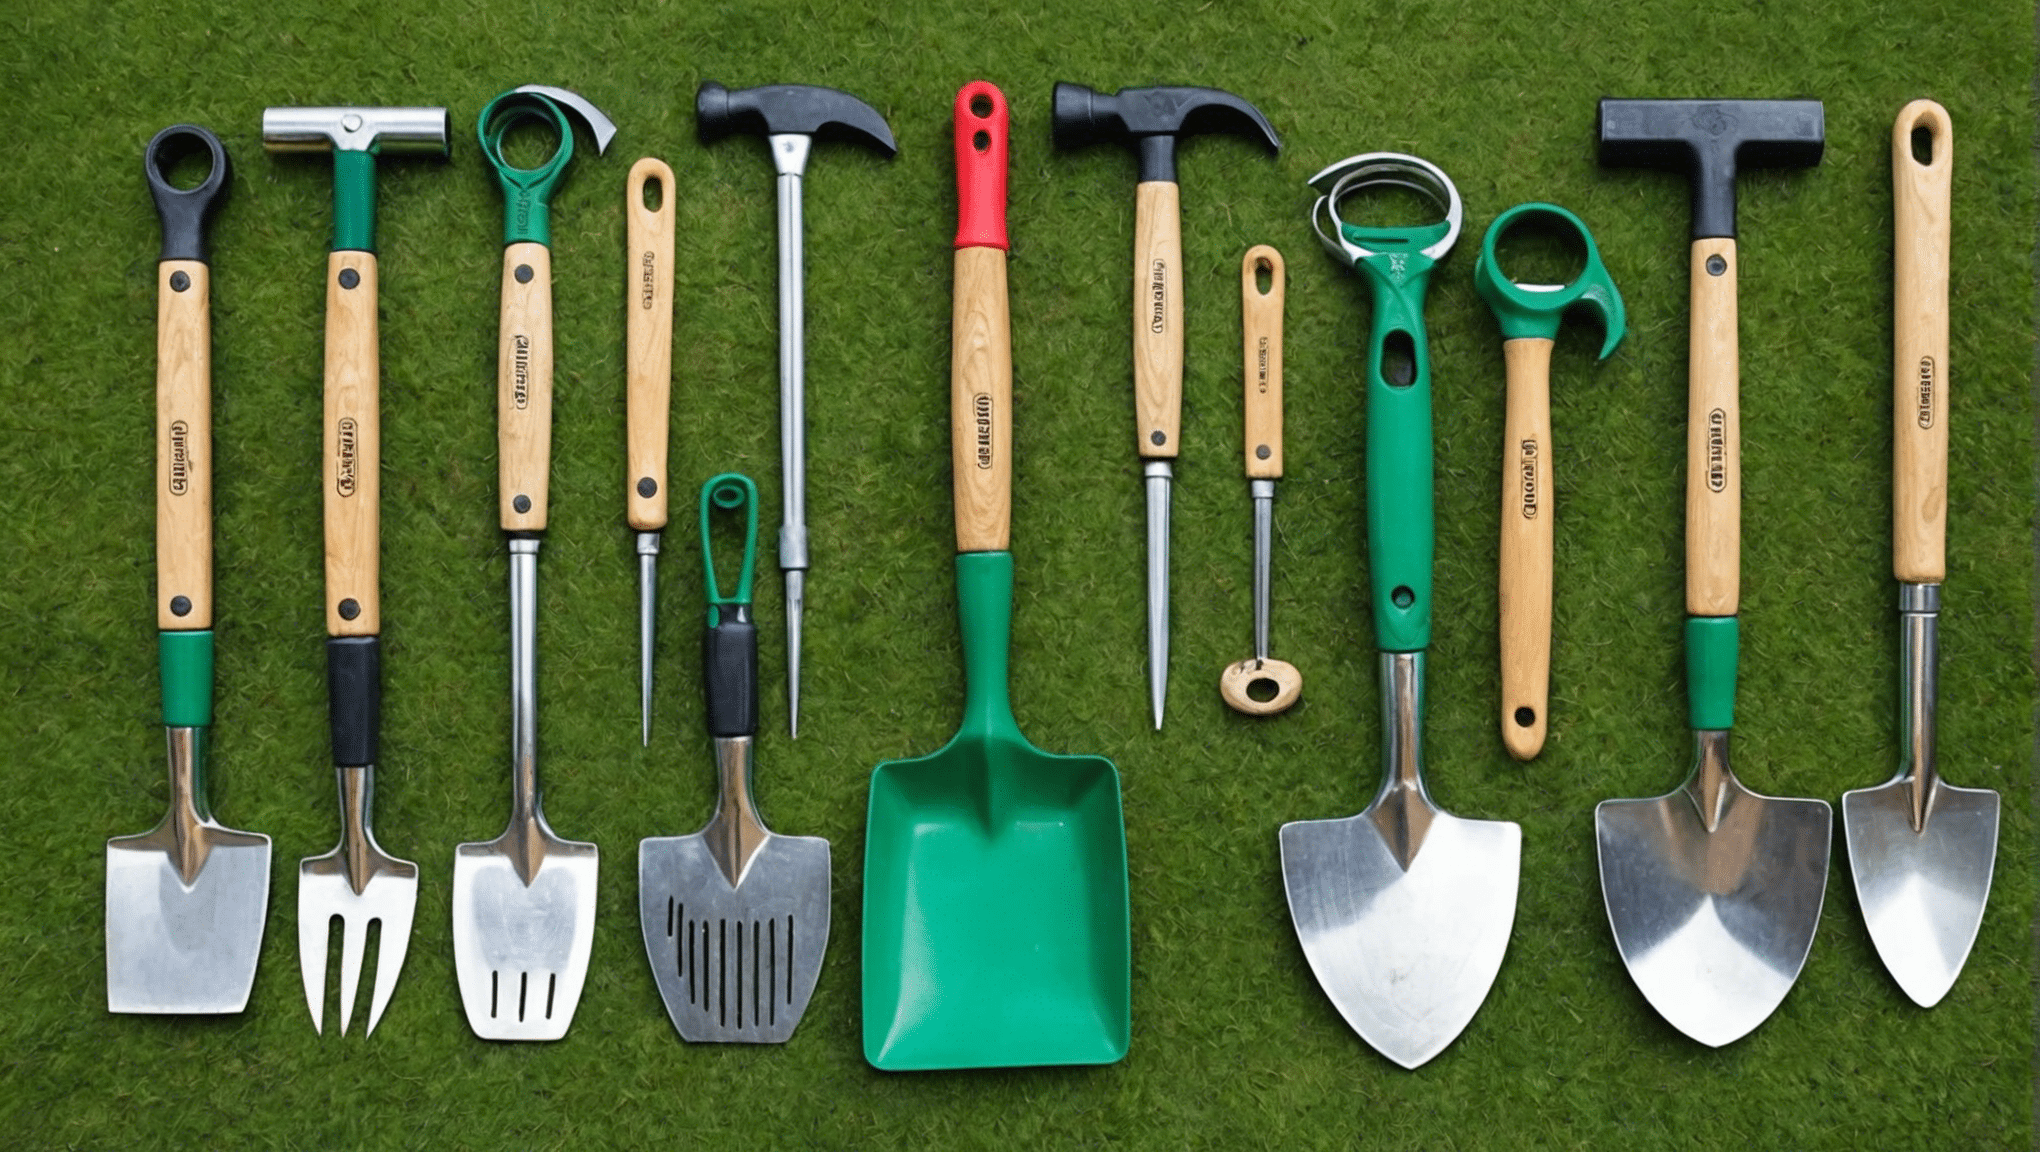 discover the essential gardening tools and their names to help you maintain a beautiful and thriving garden. find out the must-have equipment for all your gardening needs.